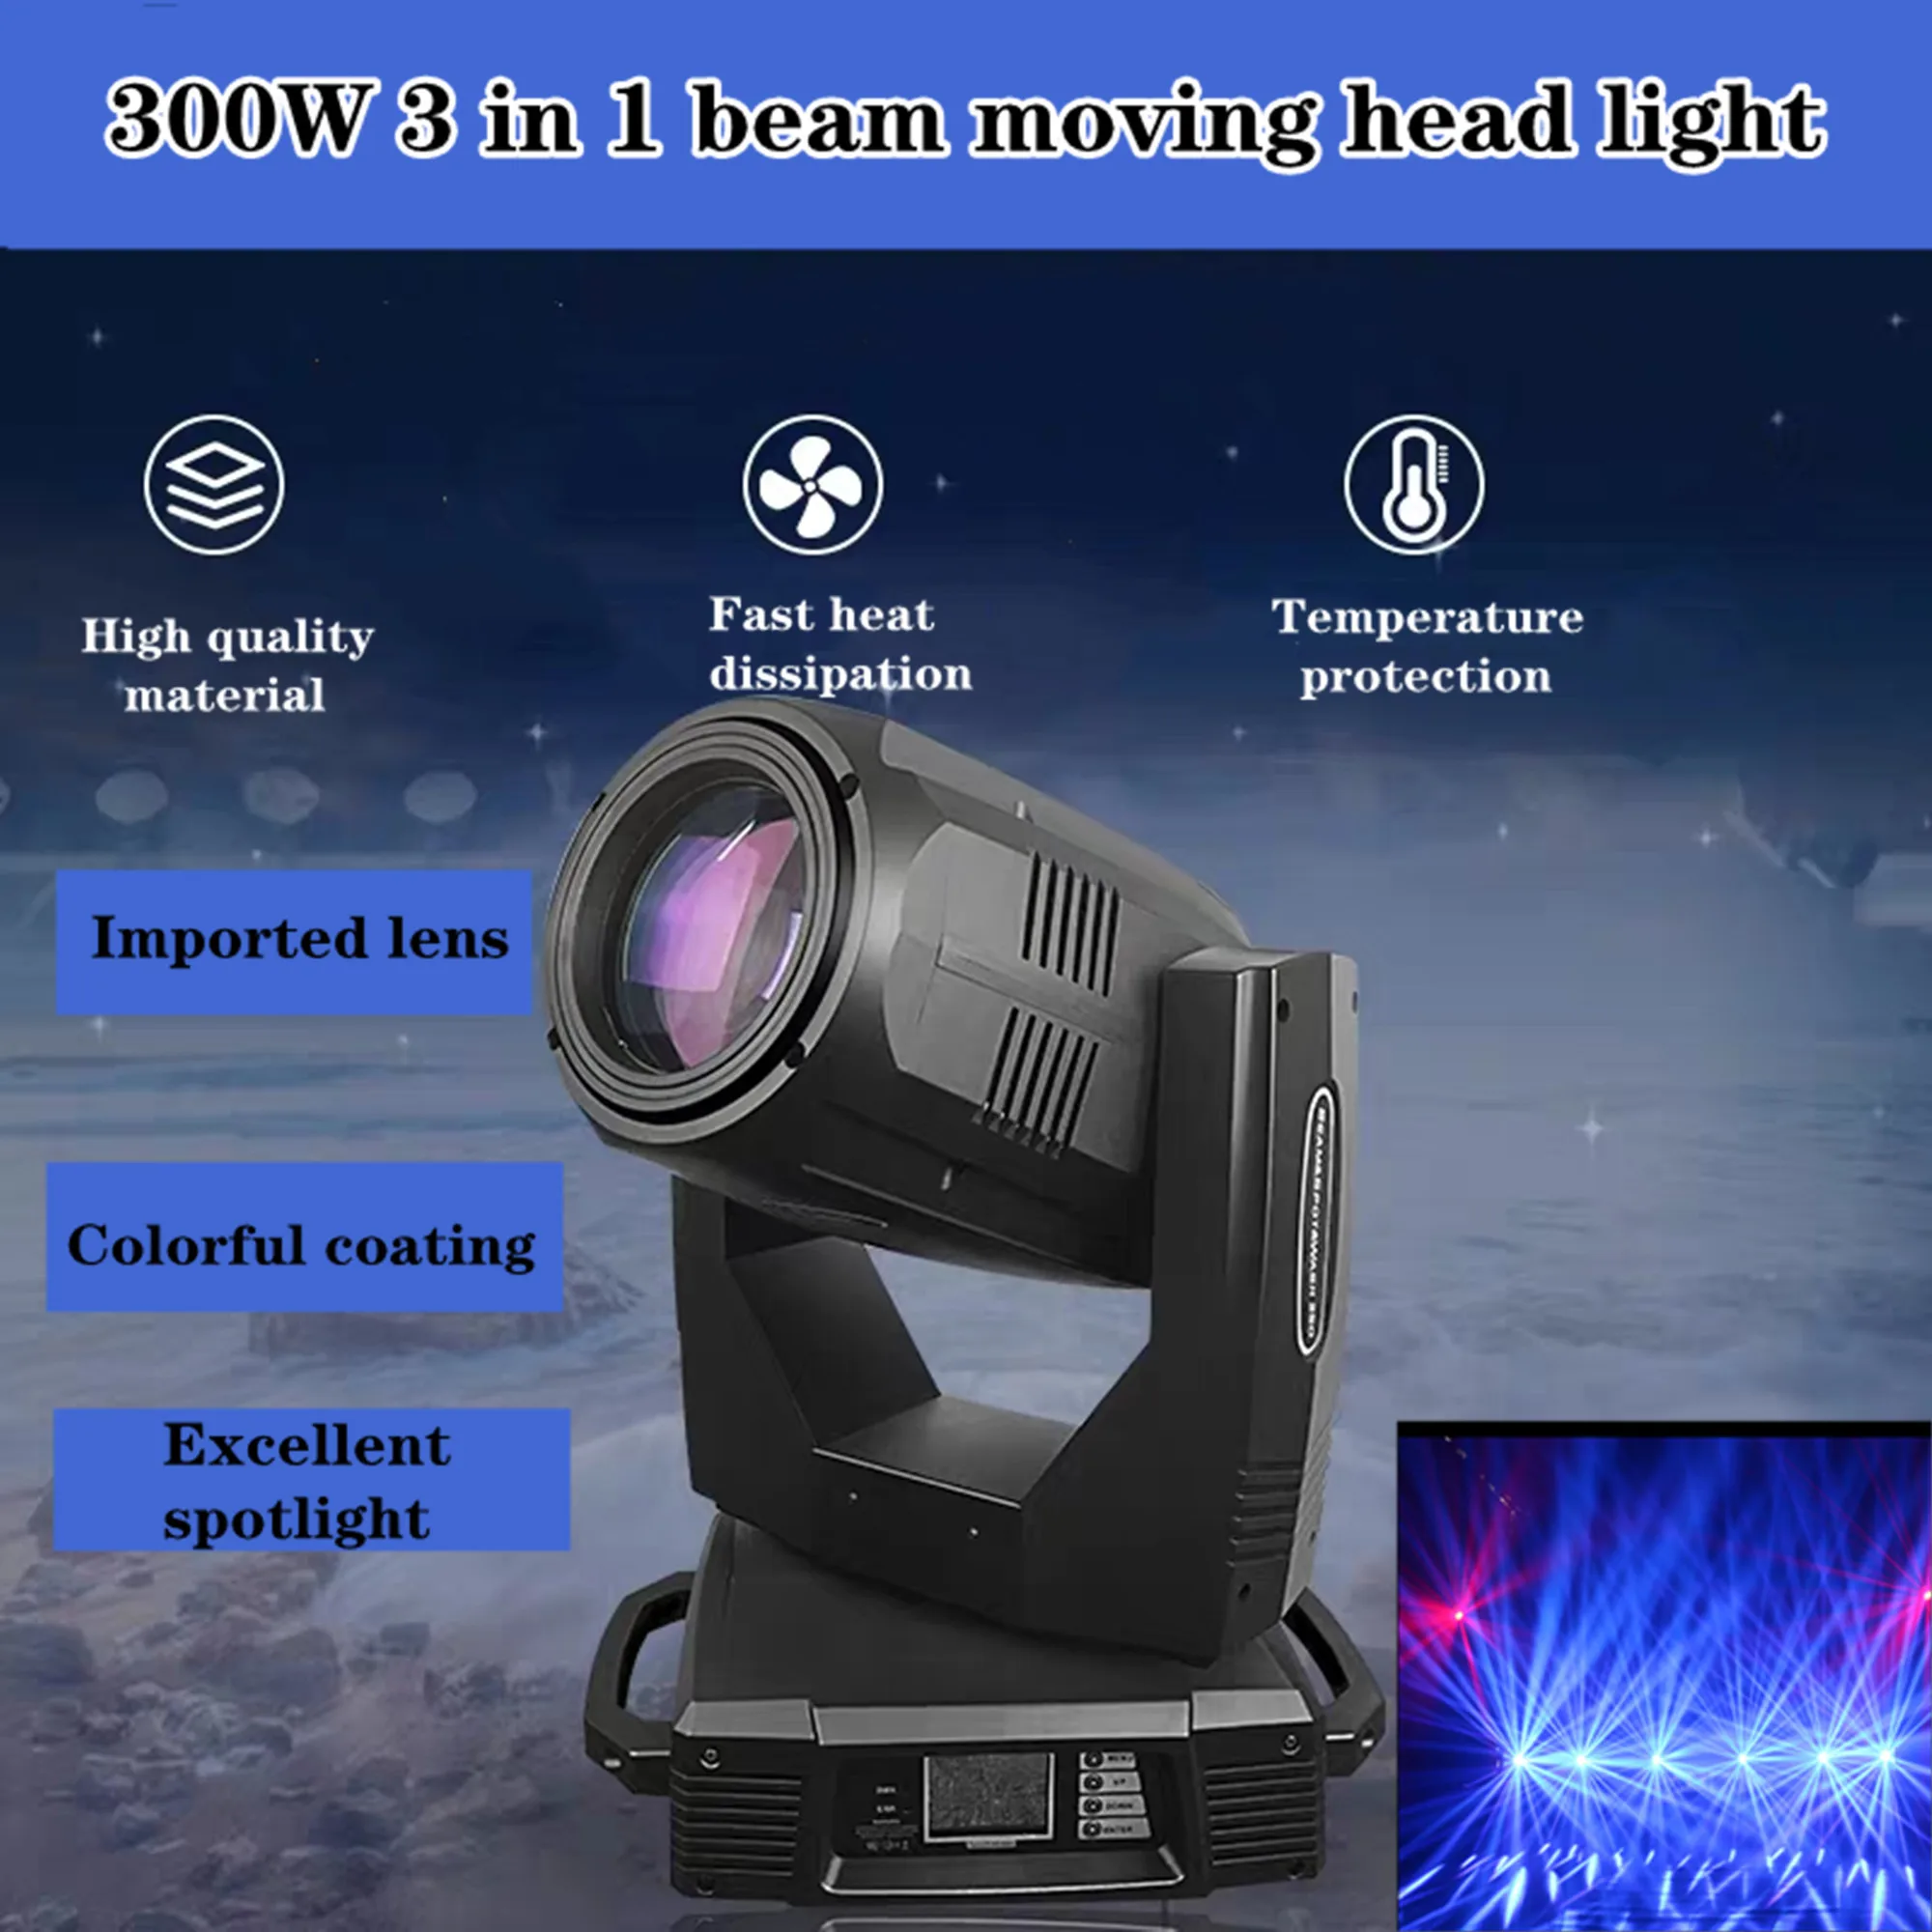 

LED 350W 3in1 Moving Head Lighting DMX512 Light Multi Function Spot Enlarge For Club Dj Stage Theater Spectator Seat